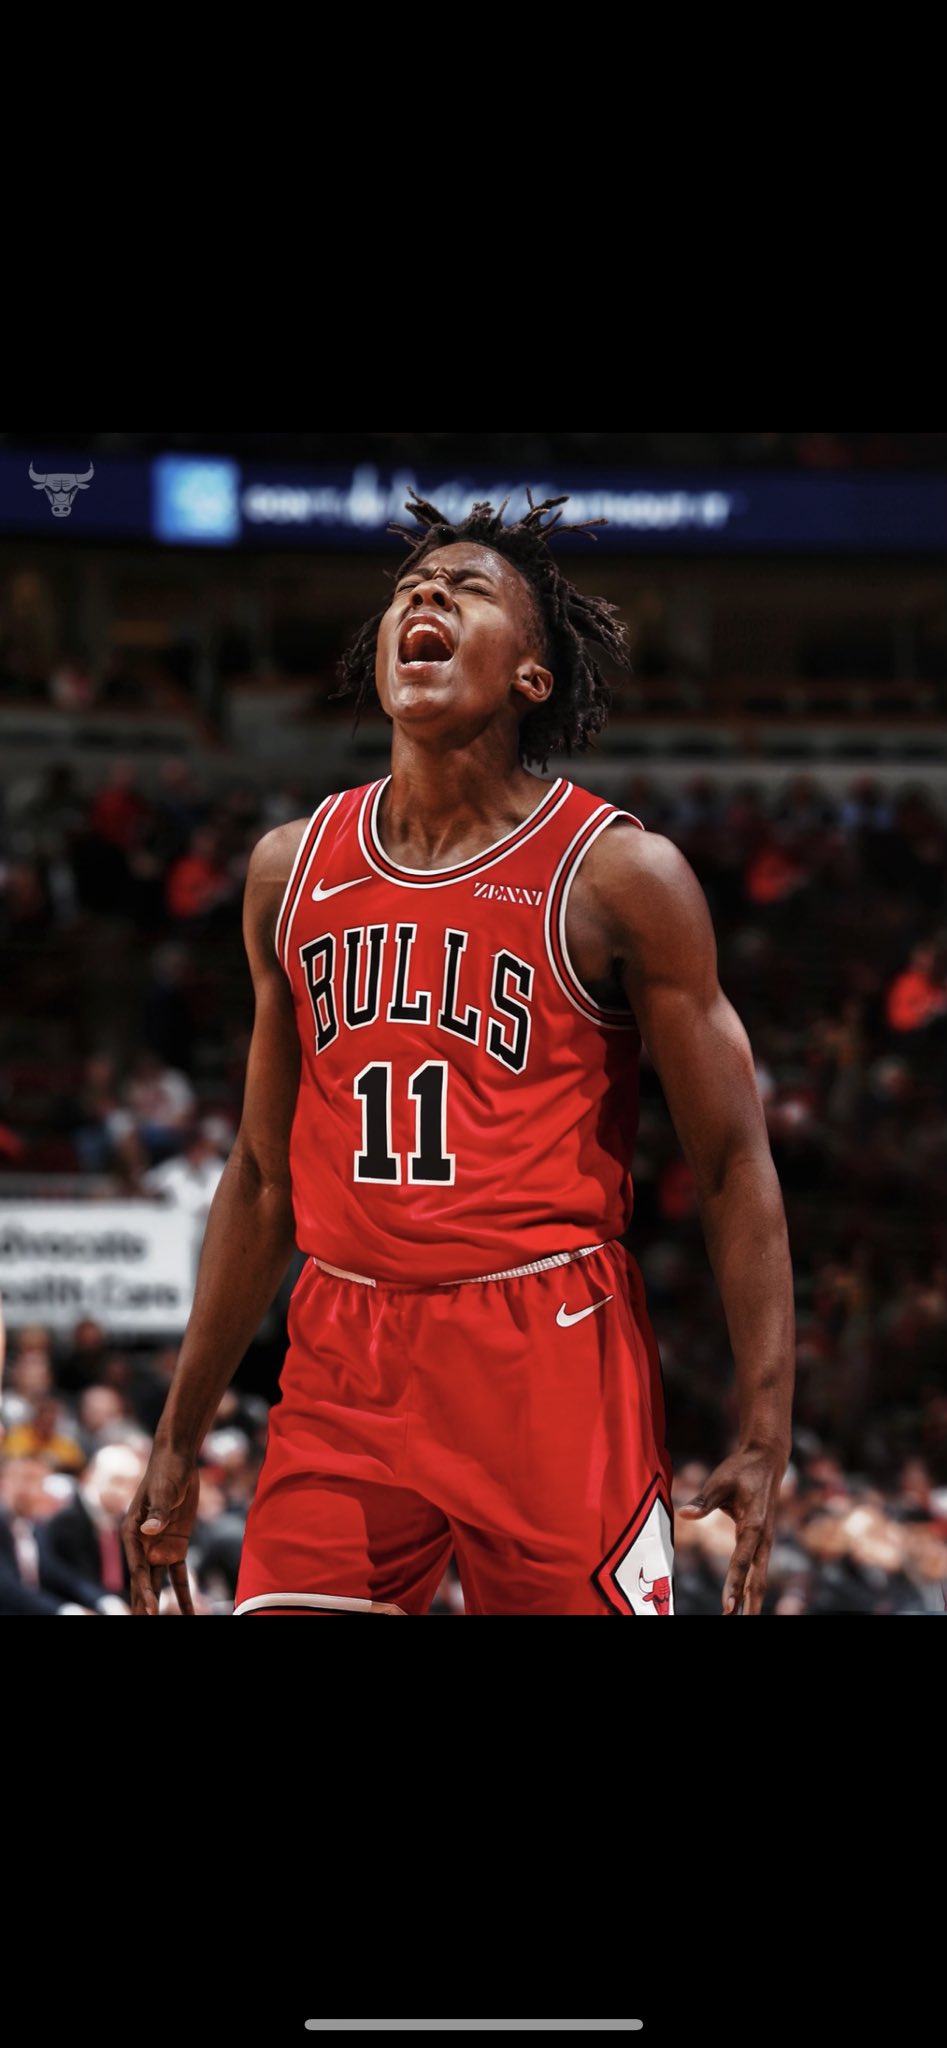 Chicago Bulls - Ayo Dosunmu is about to put on for our city